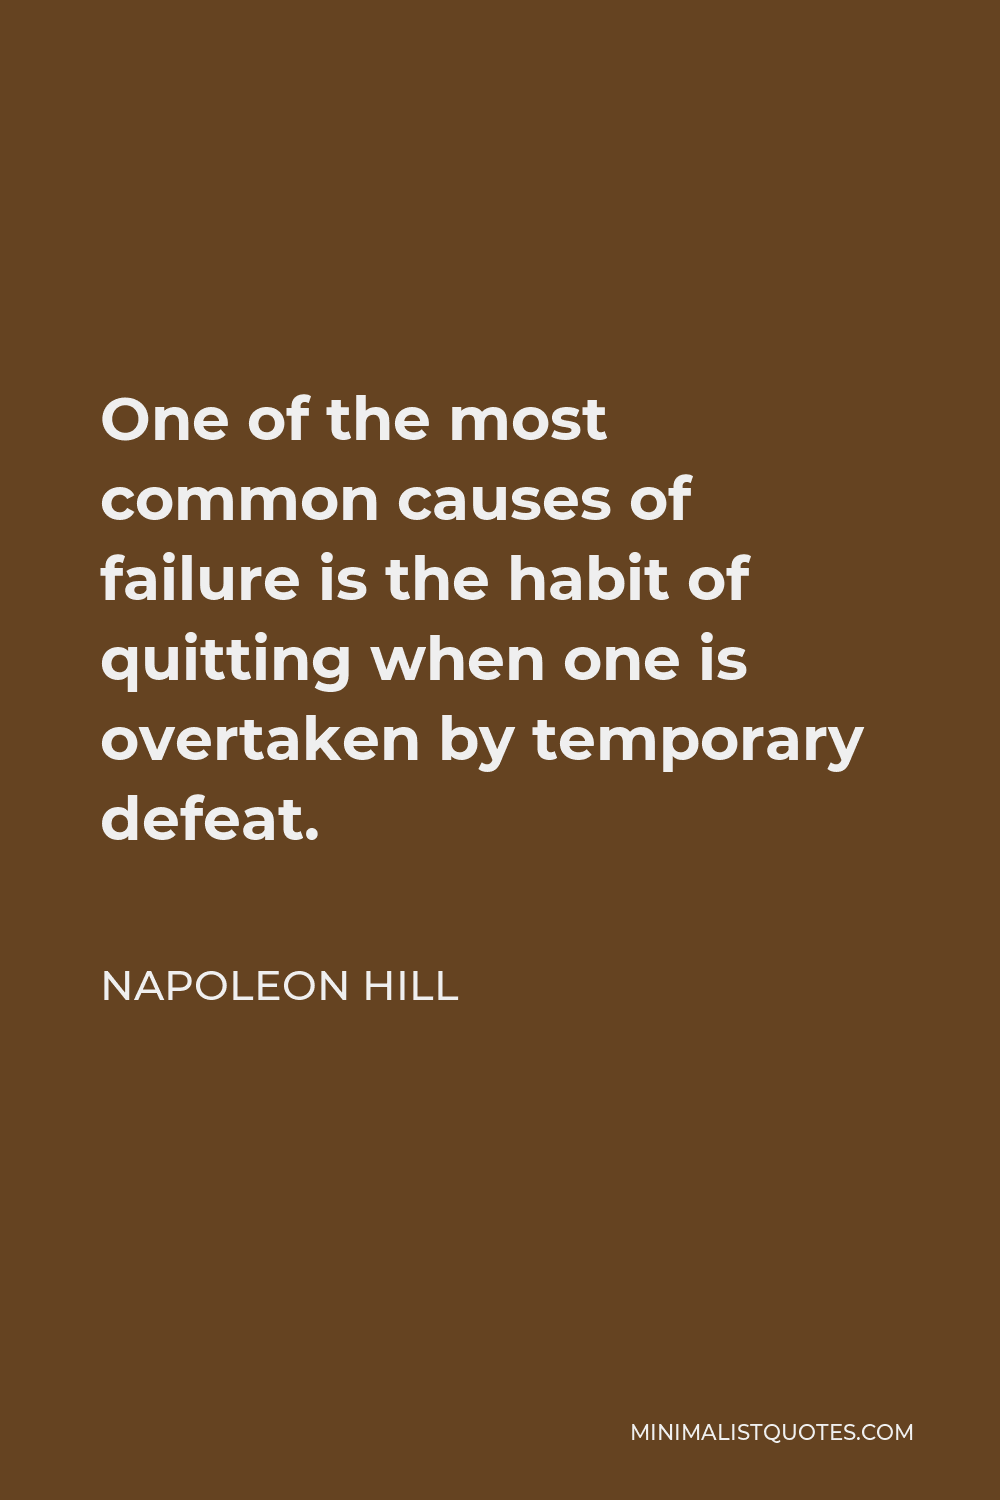 Napoleon Hill Quote - One of the most common causes of failure is the habit of quitting when one is overtaken by temporary defeat.